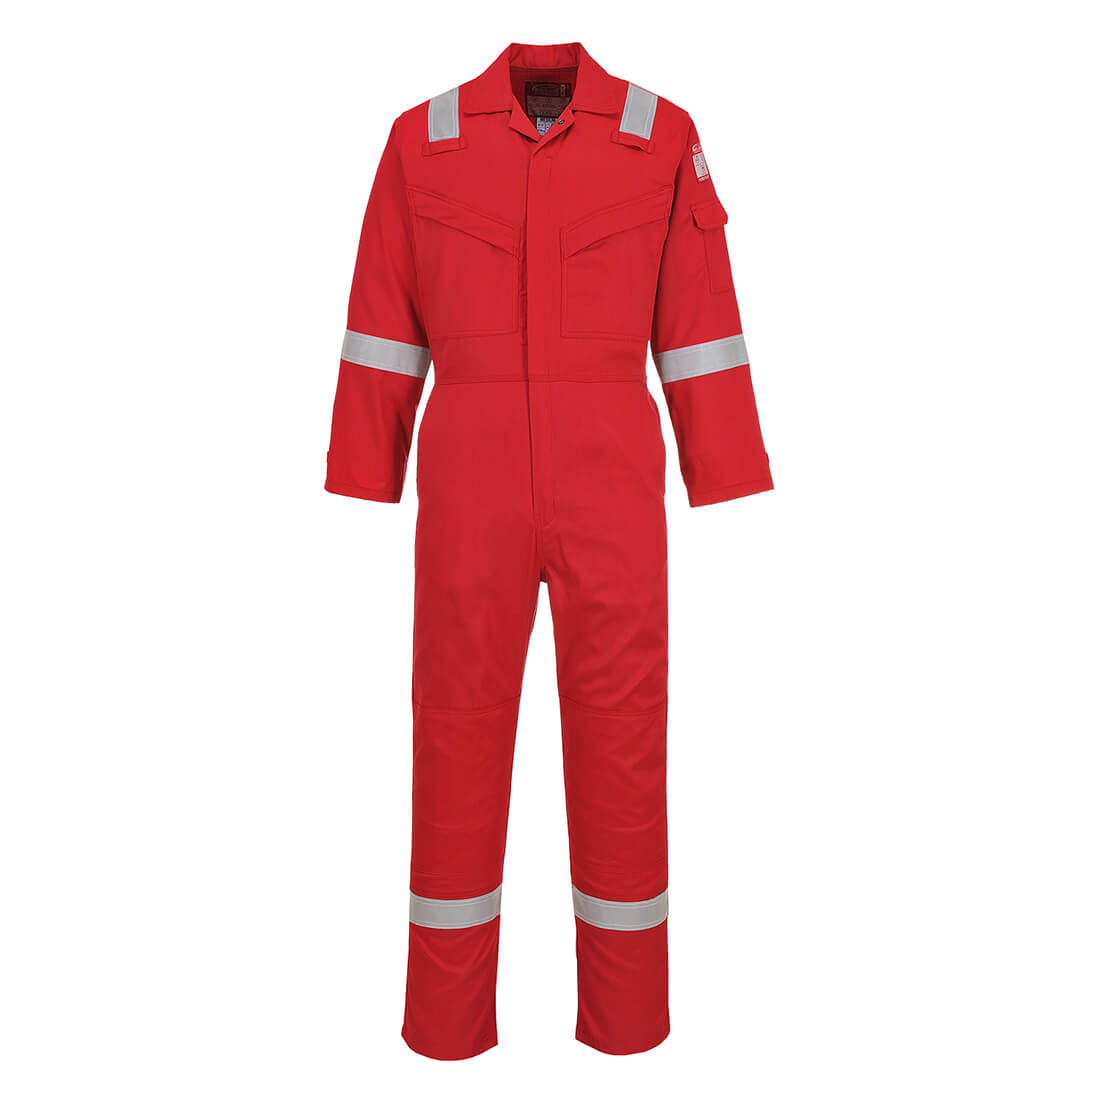 Image of Biz Flame Mens Flame Resistant Super Lightweight Antistatic Coverall Red 4XL 32"